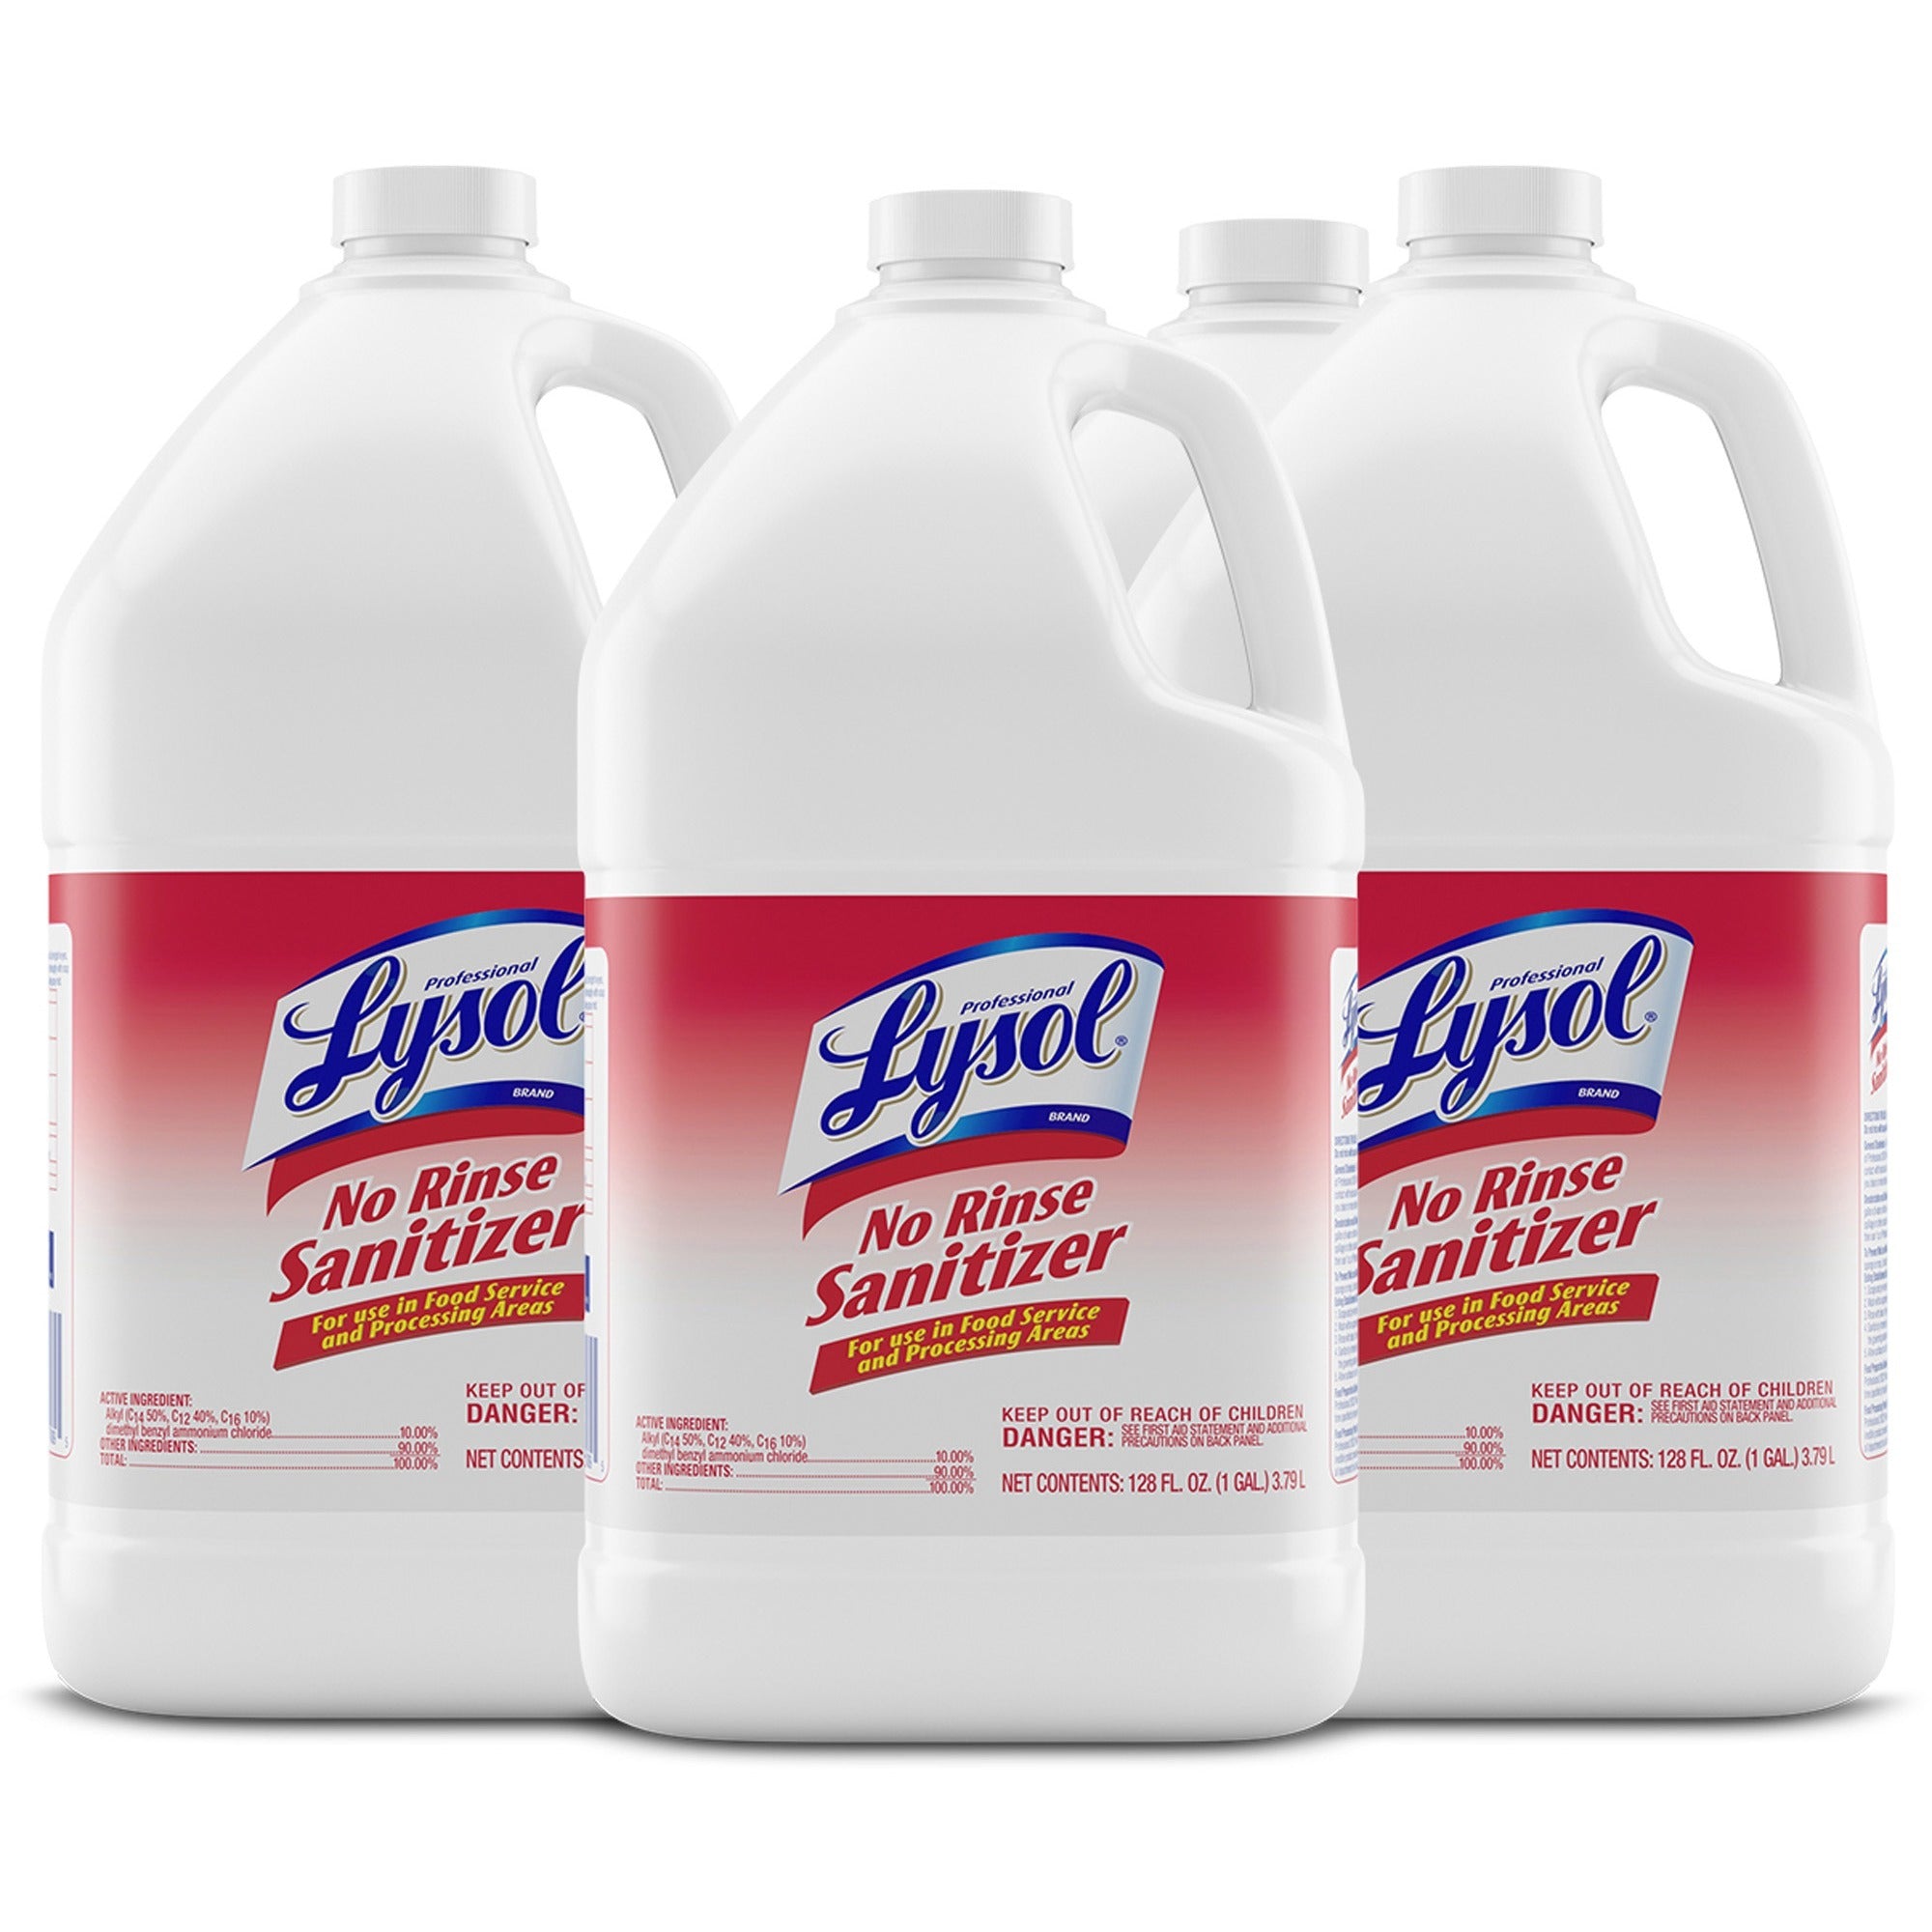 professional-lysol-no-rinse-sanitizer-for-sink-floor-wall-bathtub-food-service-area-concentrate-128-fl-oz-4-quart-4-carton-disinfectant-anti-bacterial_rac74389ct - 1